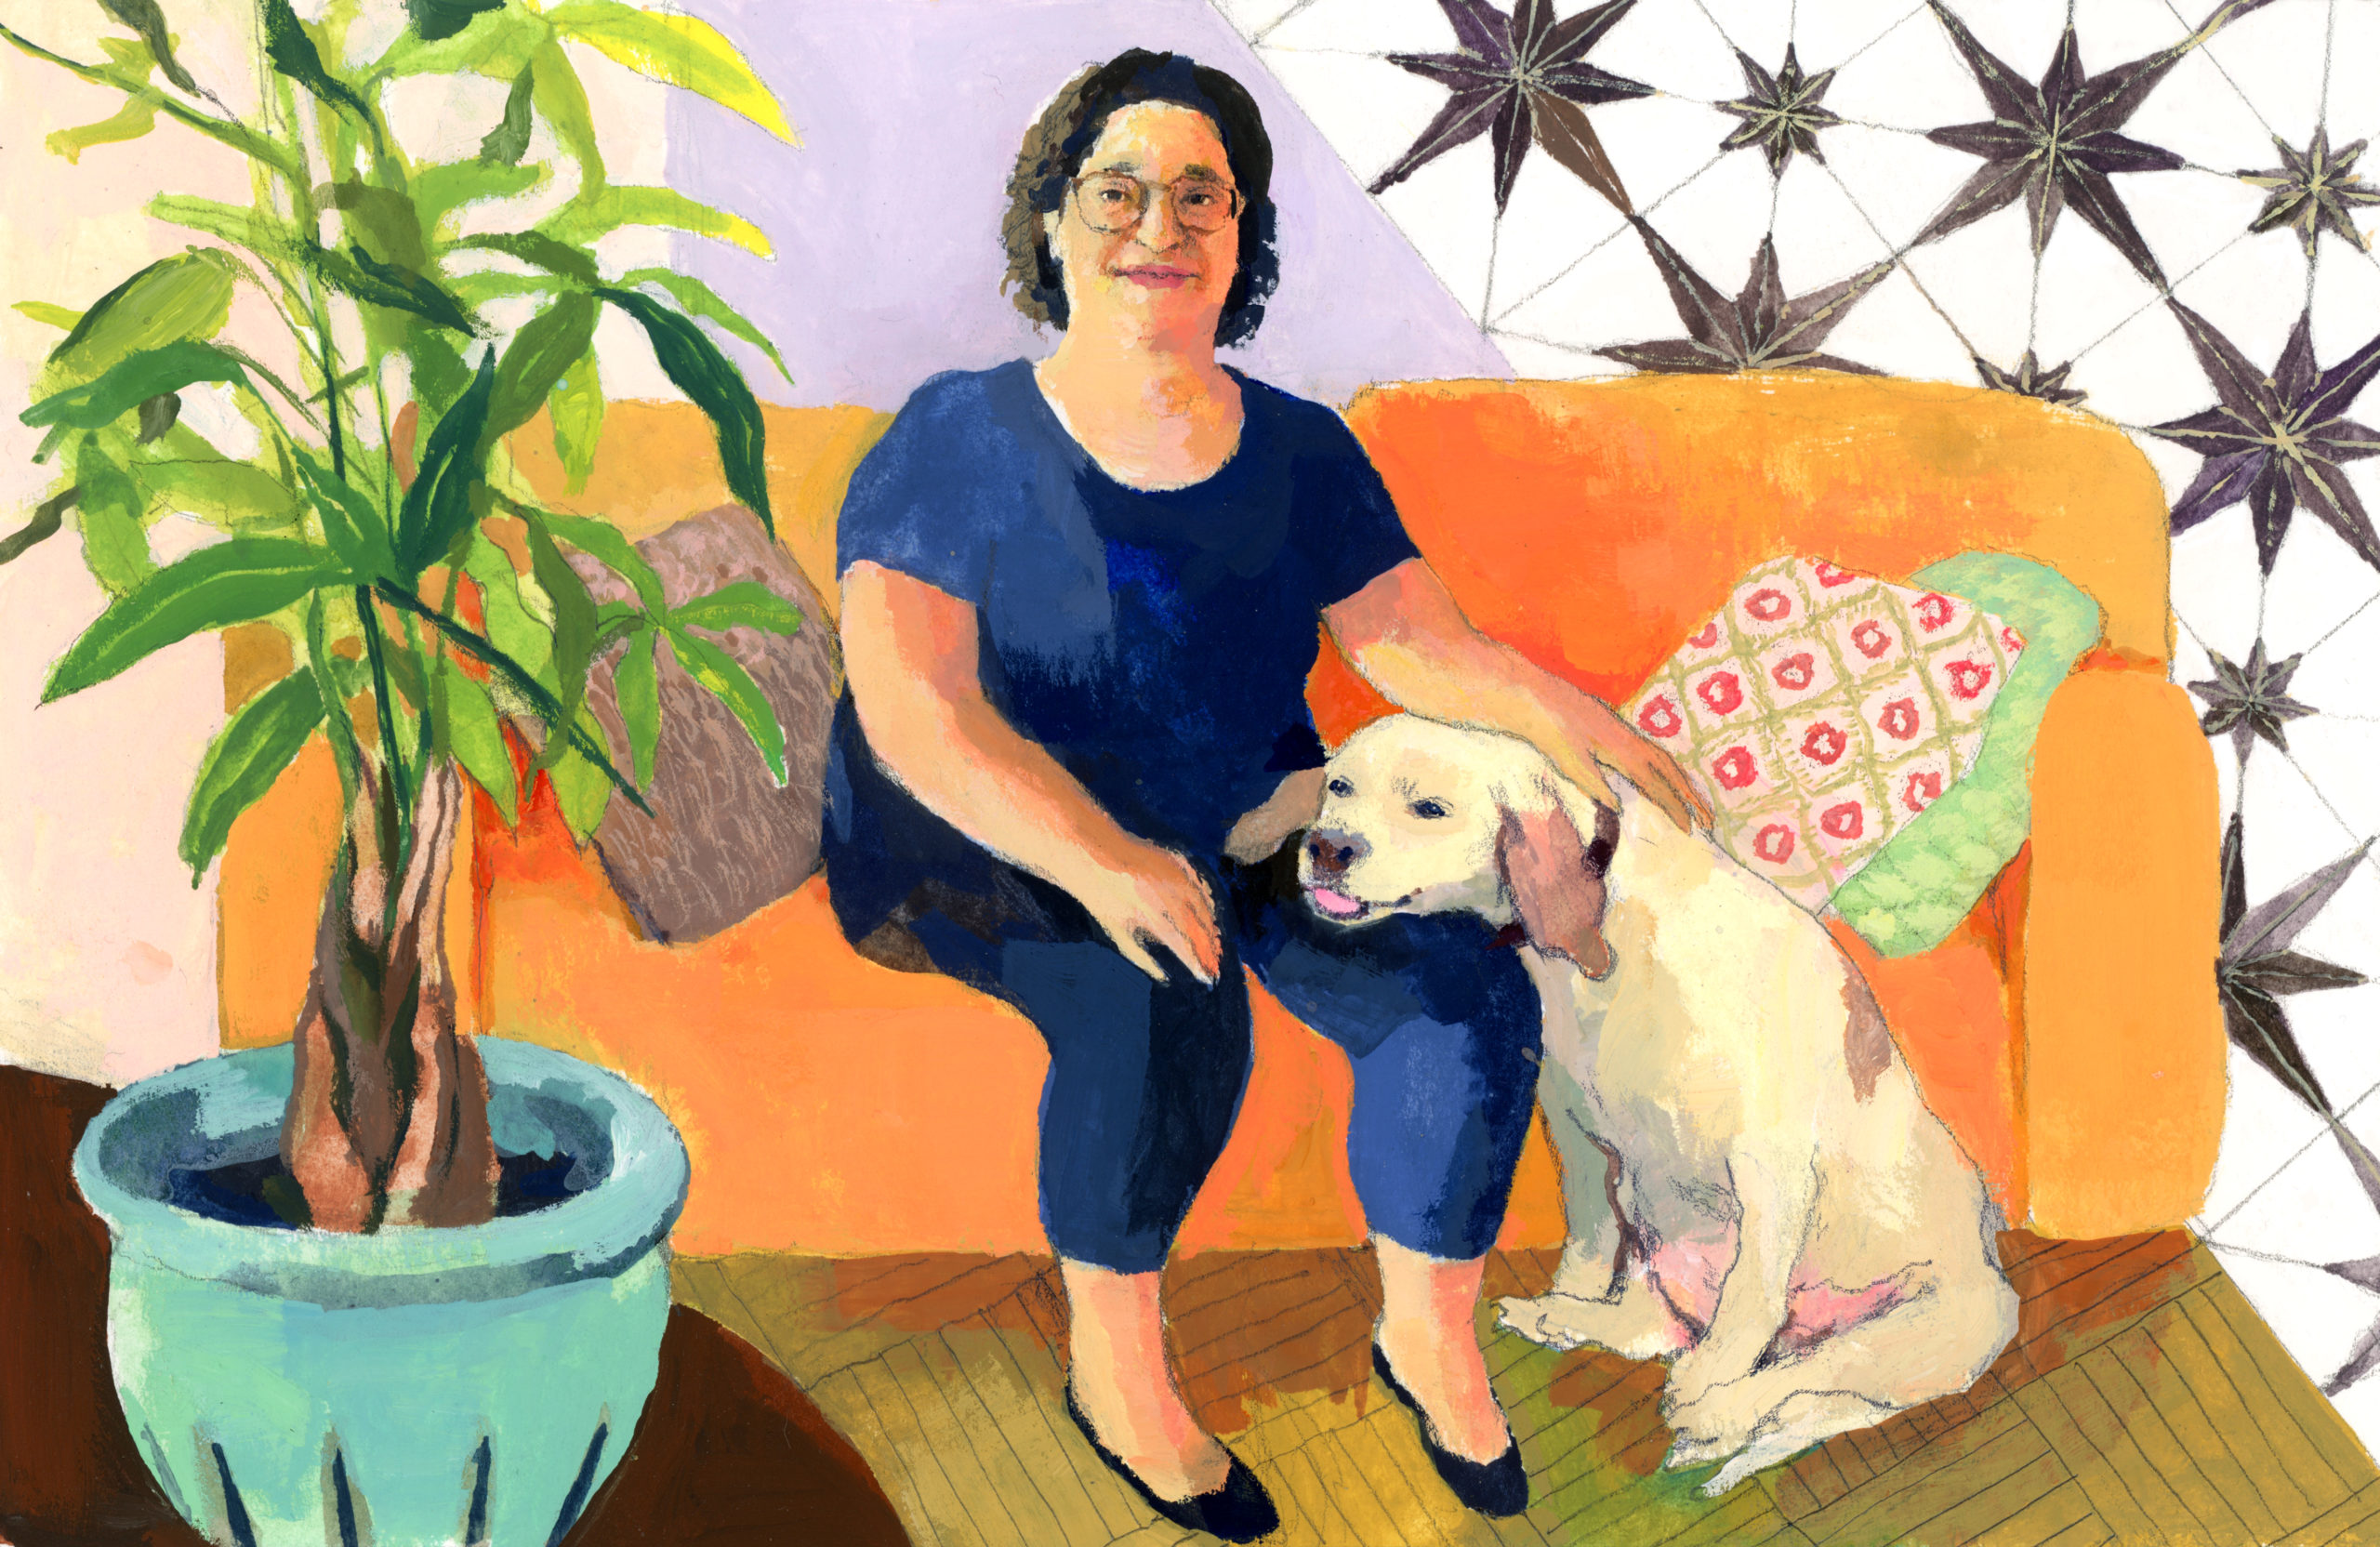 Carmen Maria Machado and her Beagle mix dog, Rosie, illustrated for Argos & Artemis by Jia Sung.